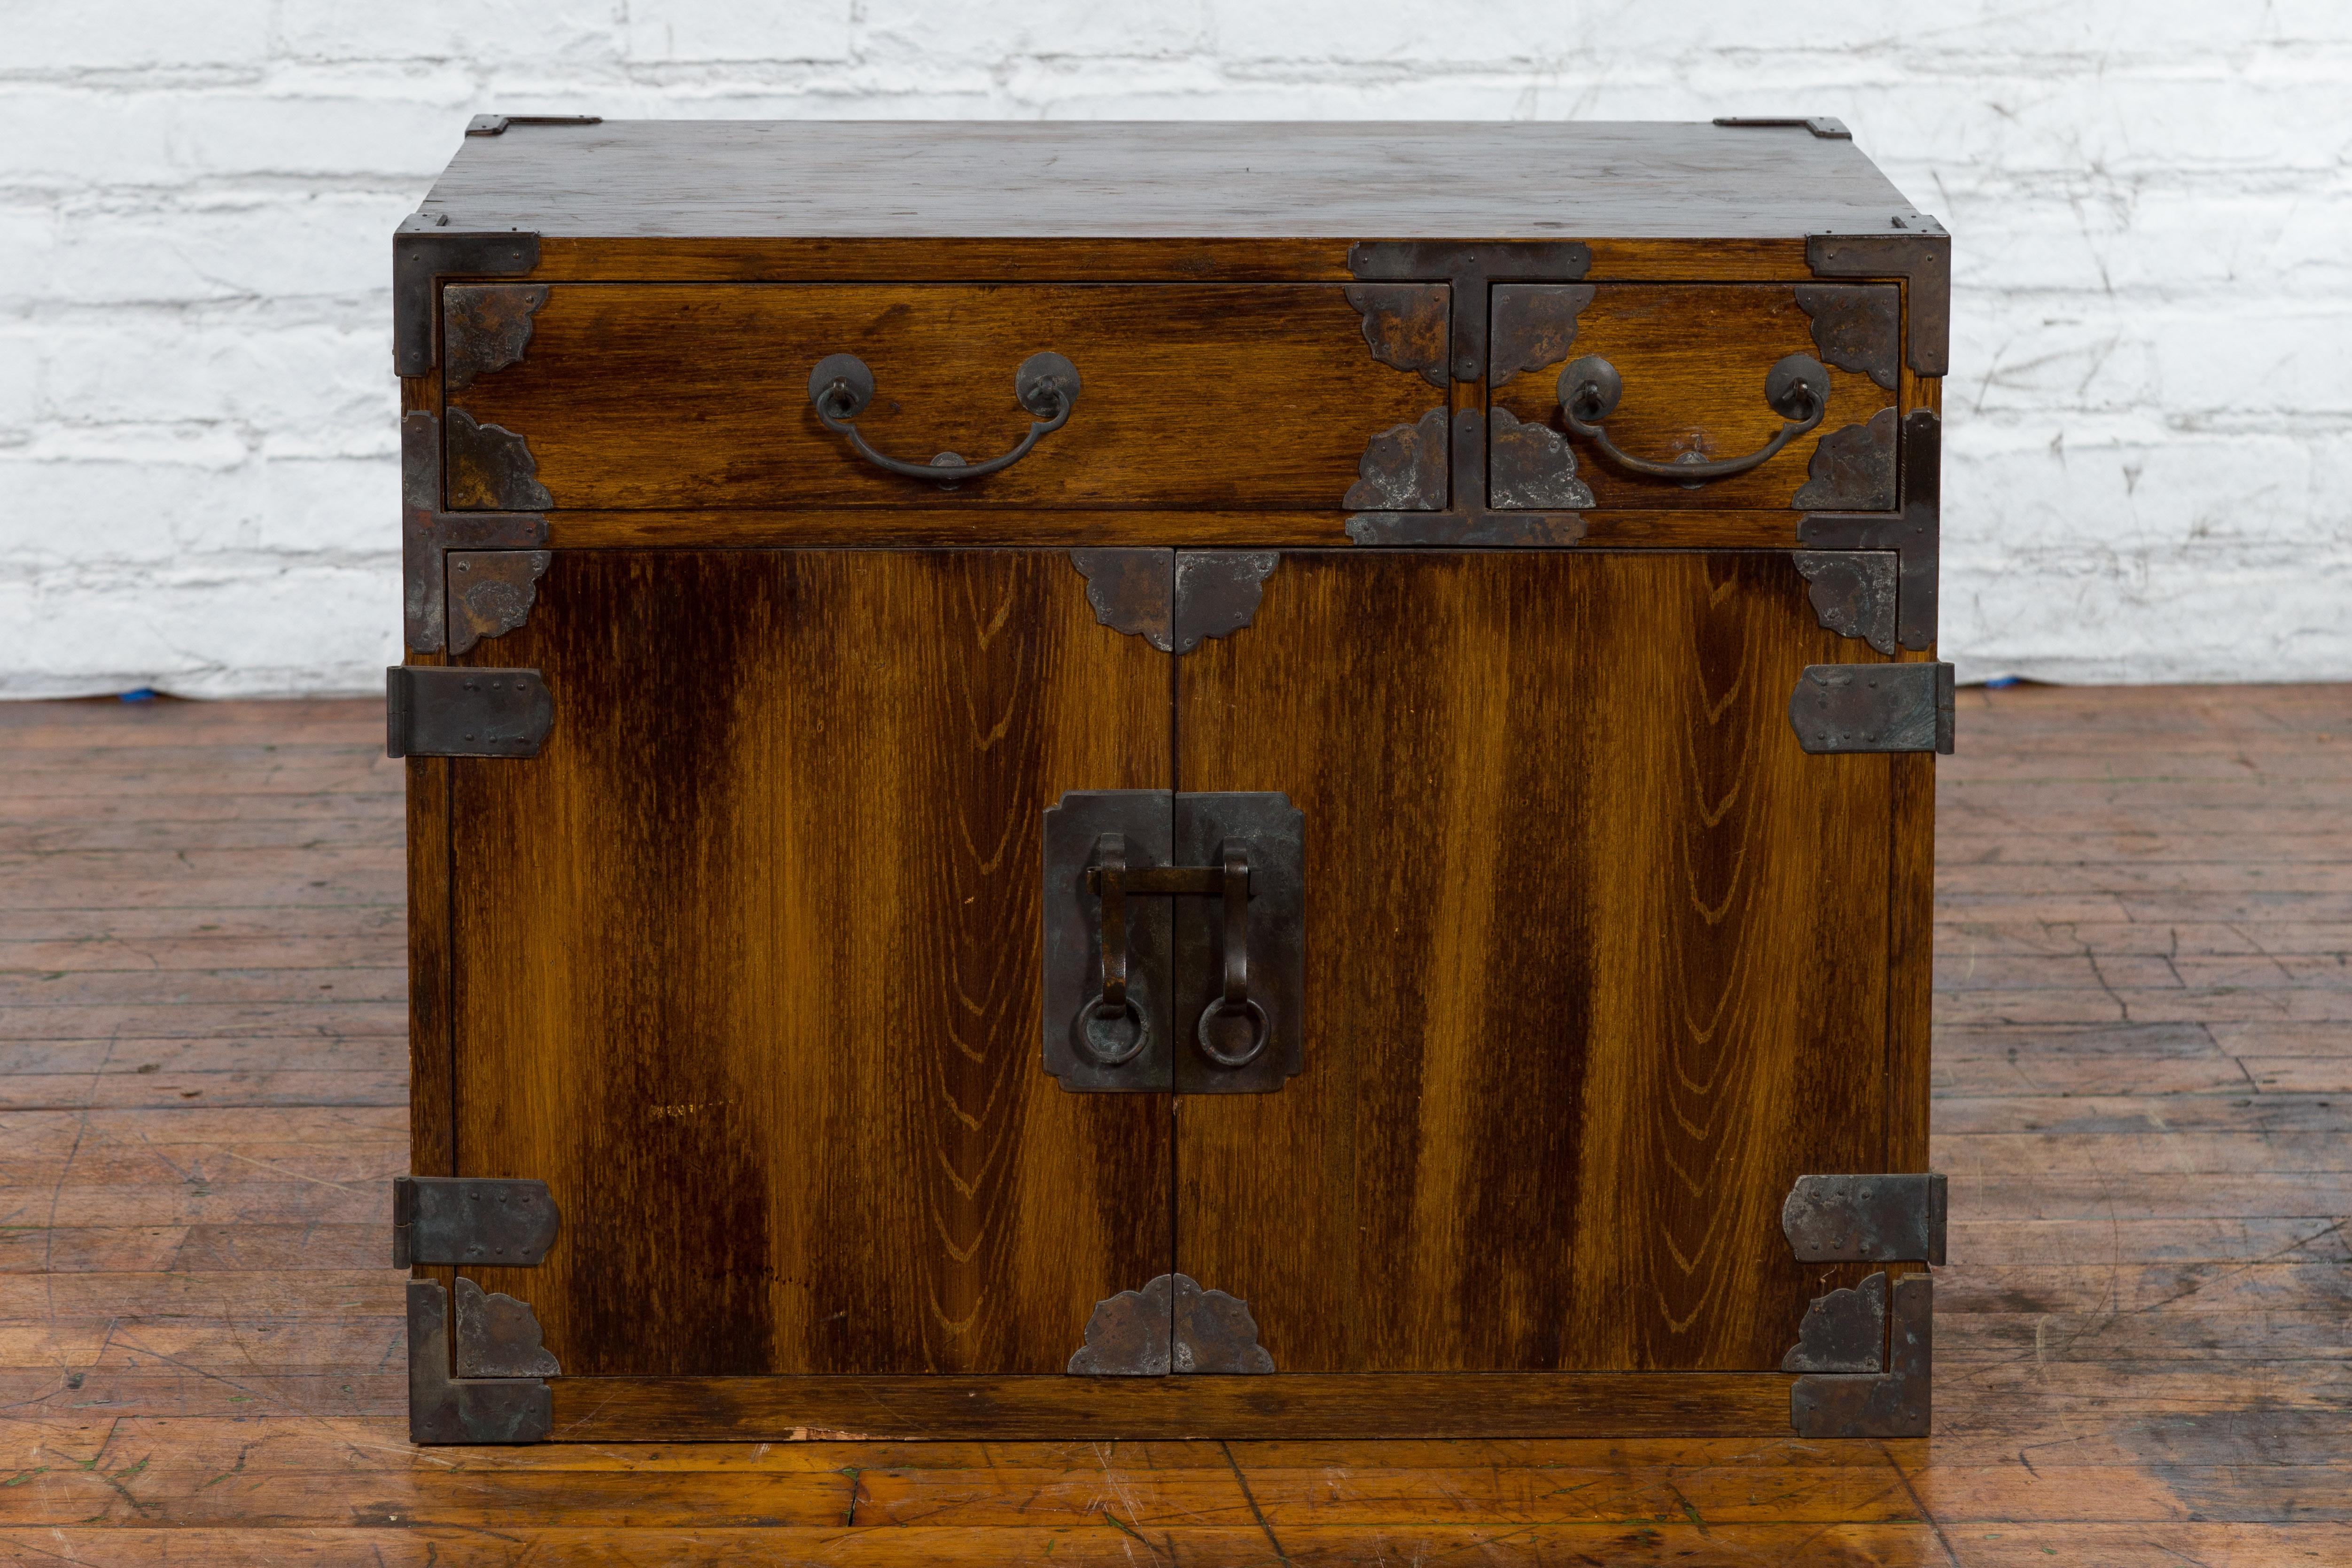 An antique Korean brown wood side cabinet from the 19th century with iron hardware, drawers, and doors. Created in Korea during the 19th century, this wooden side cabinet features a linear silhouette perfectly complimented by an abundant iron